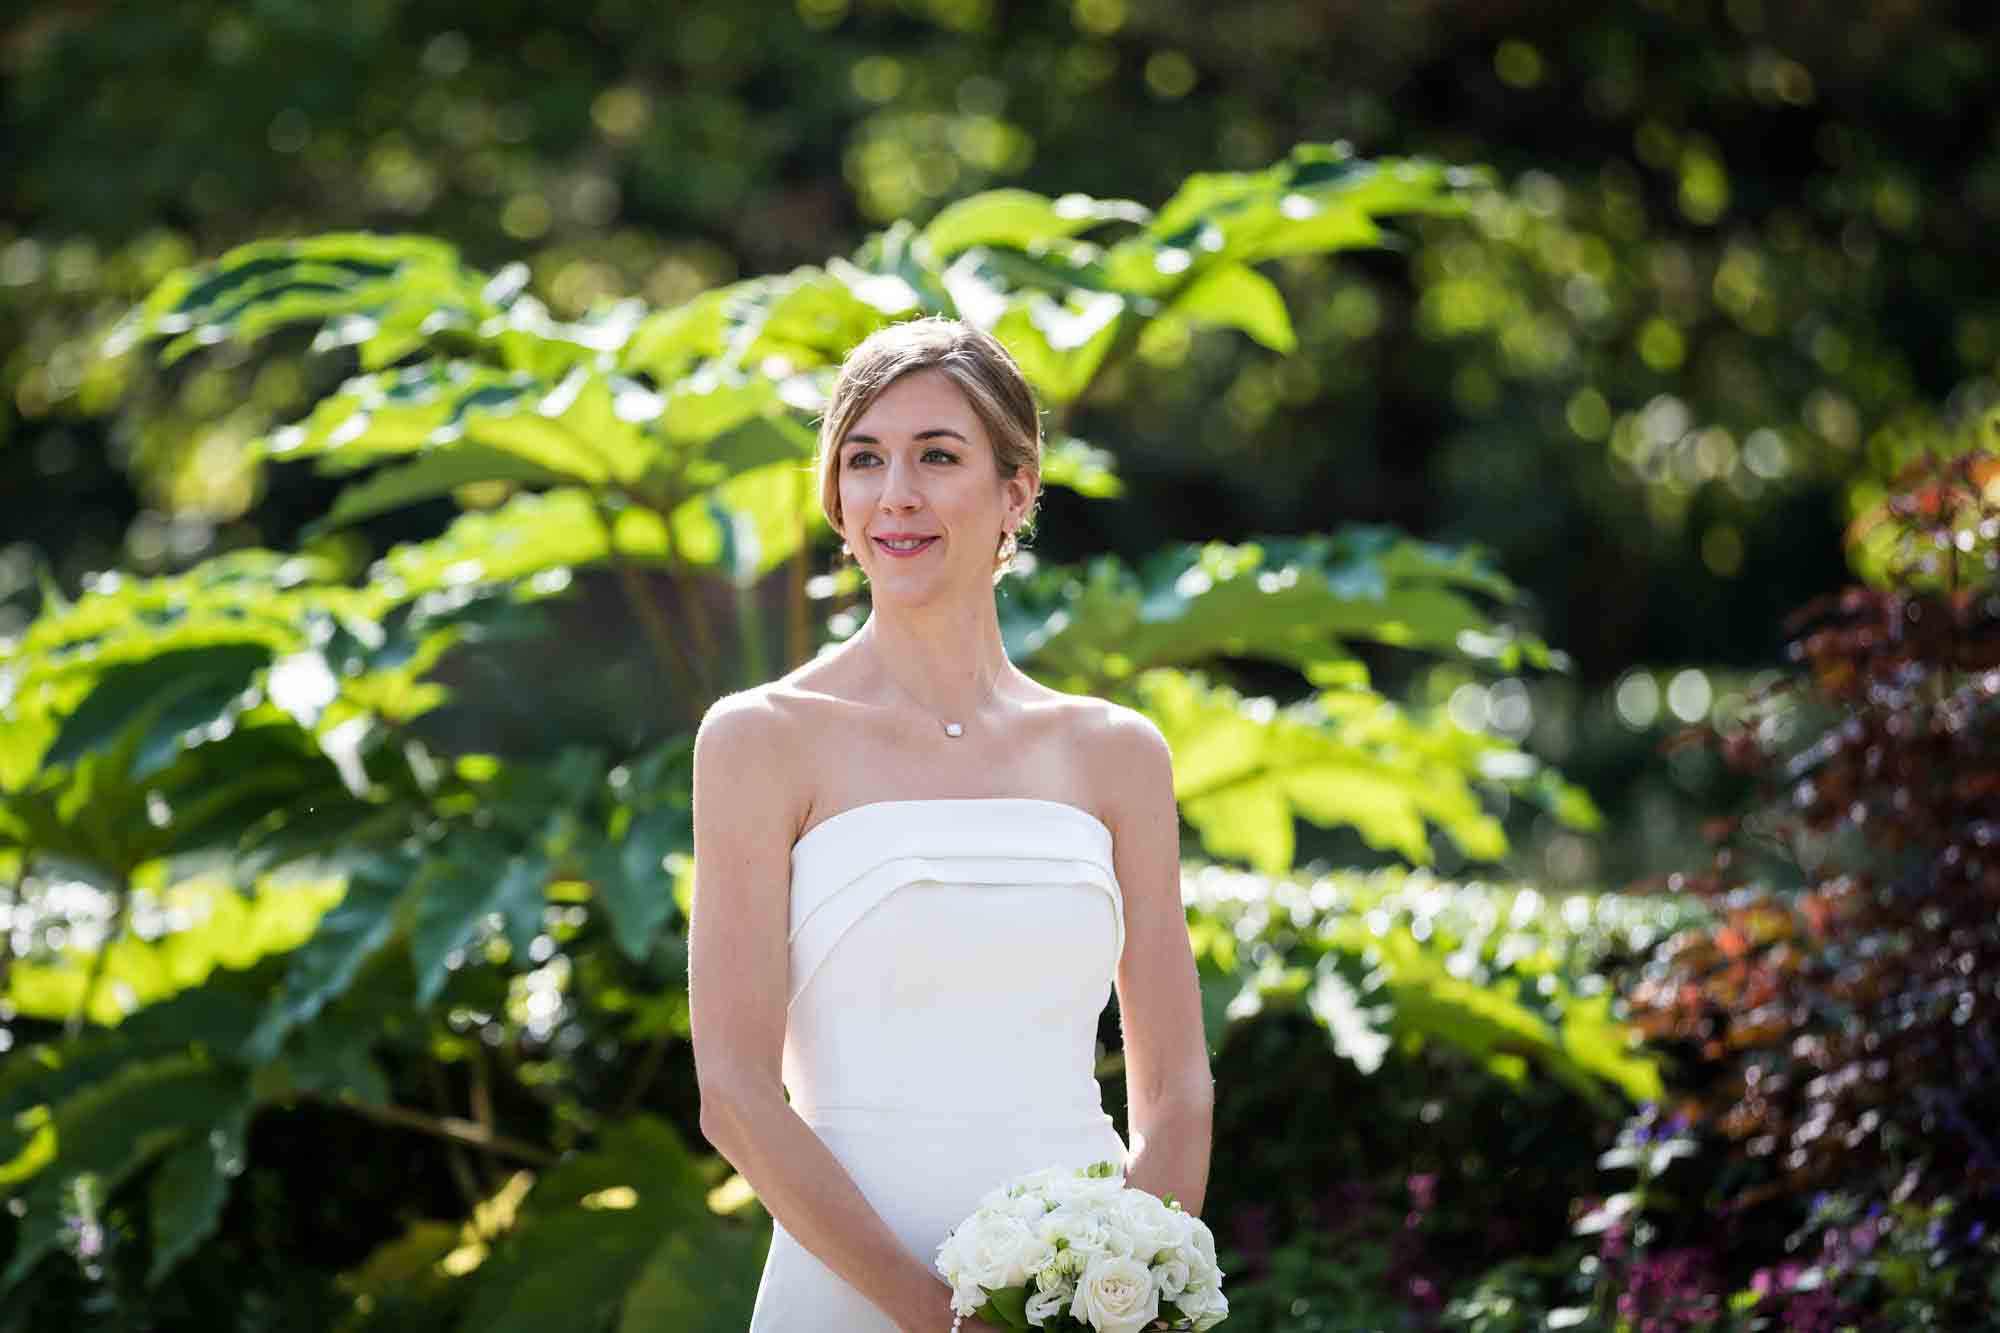 Conservatory Garden wedding photos of bride wearing strapless white dress looking for groom